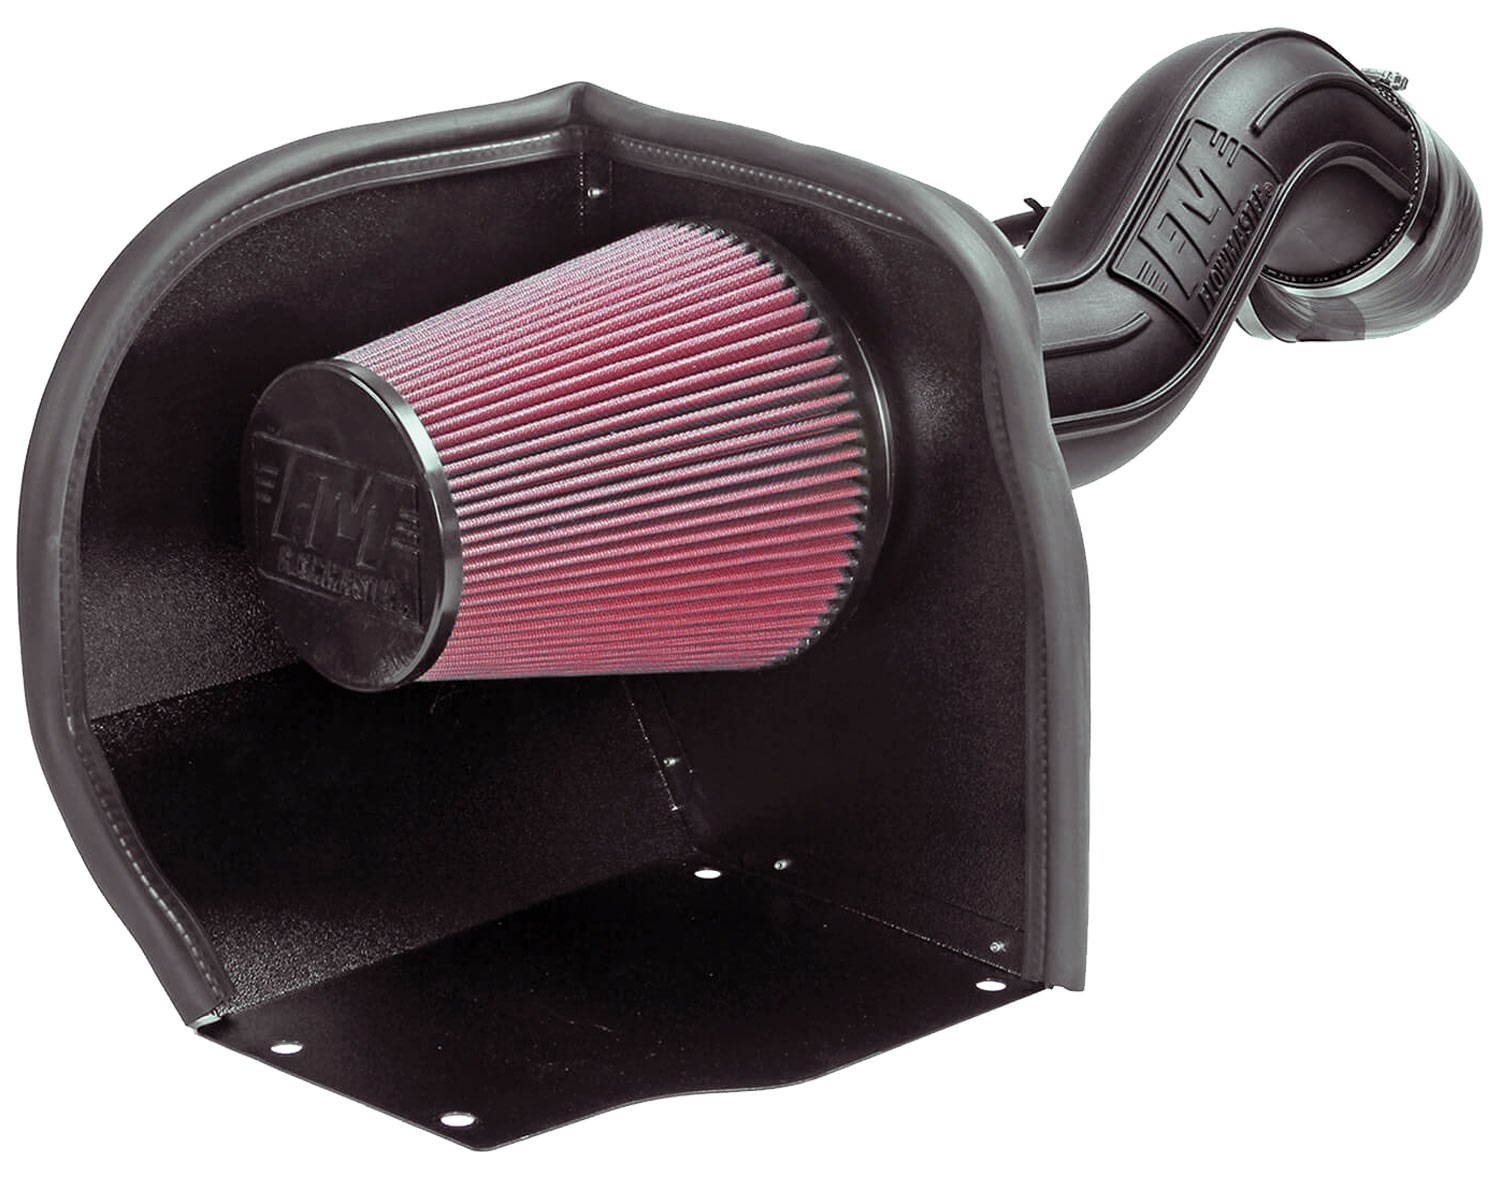 Flowmaster’s new Delta Force Performance Air Intake system